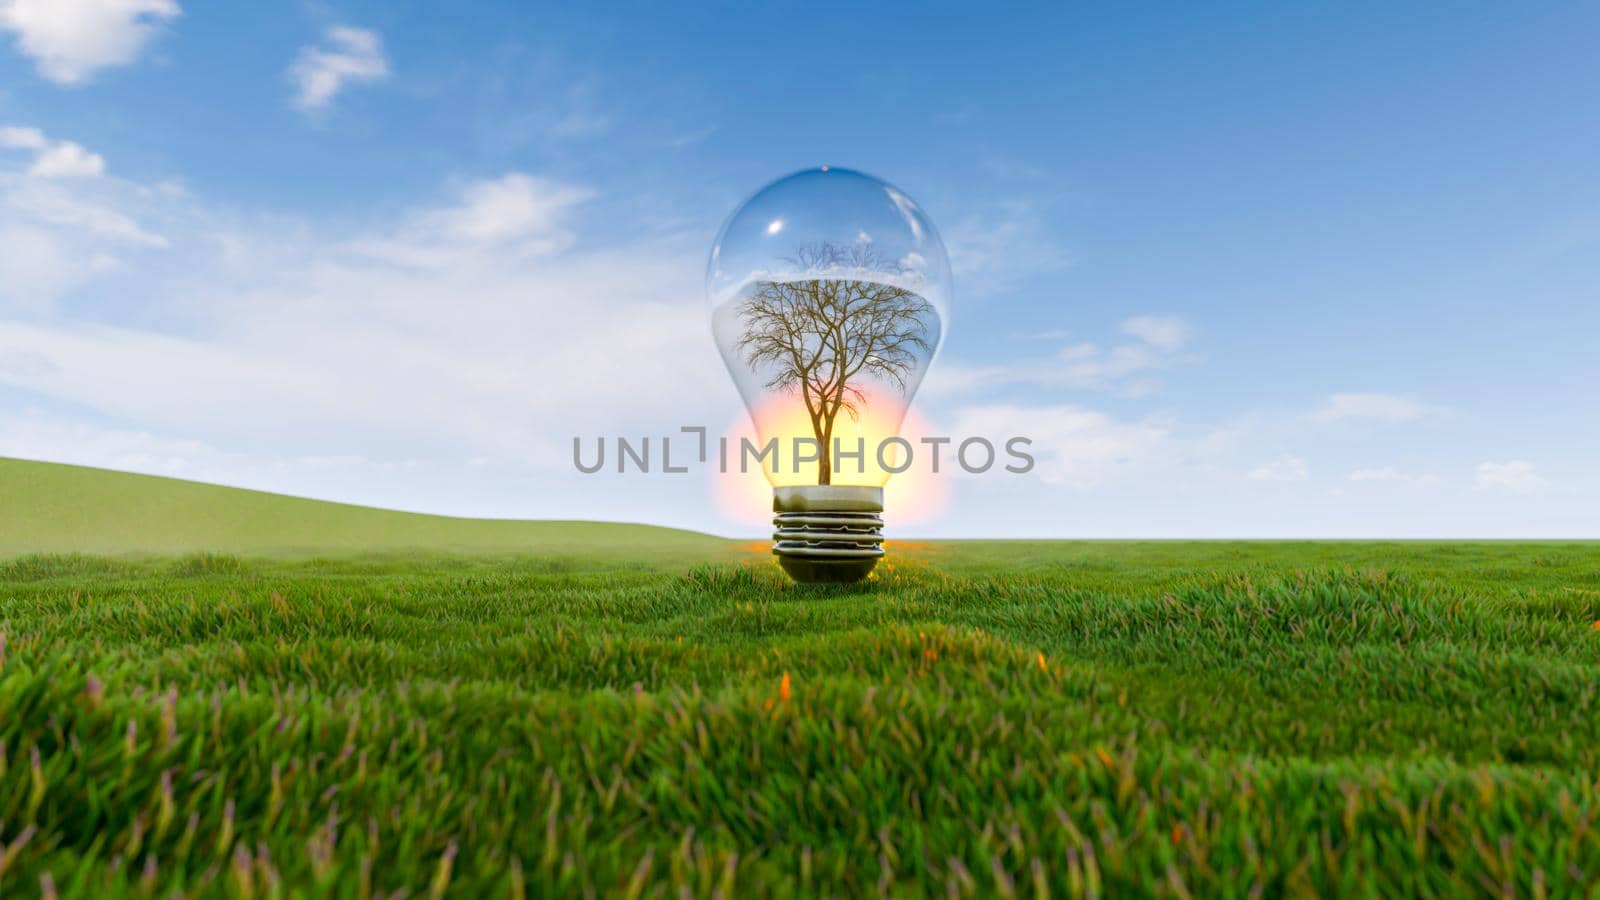 3D Rendering Illustration Of Light Bulb With Save World Creative Idea Concept For Sustainable Energy by Arissuu1